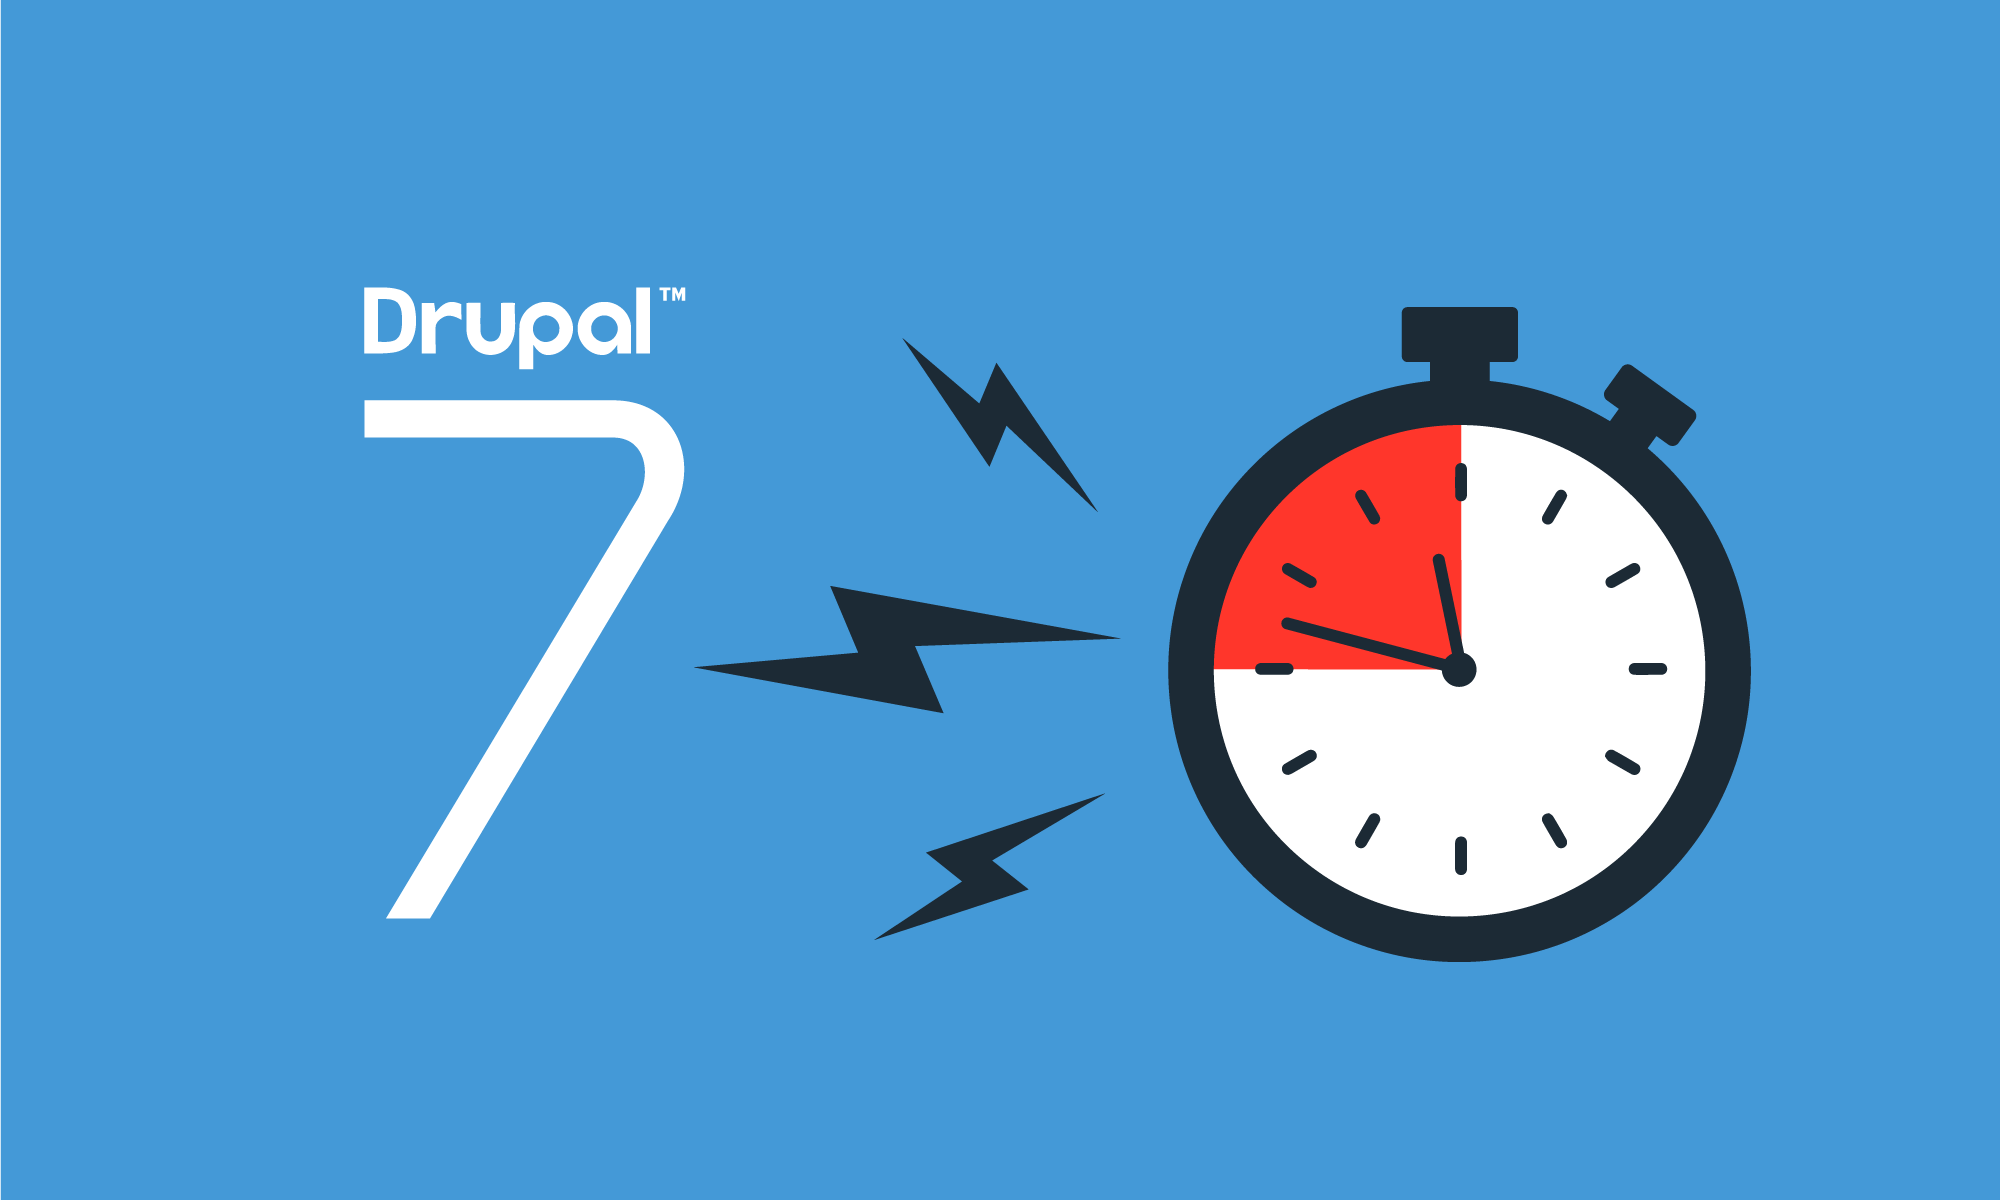 Drupal 7 end of life is around the corner